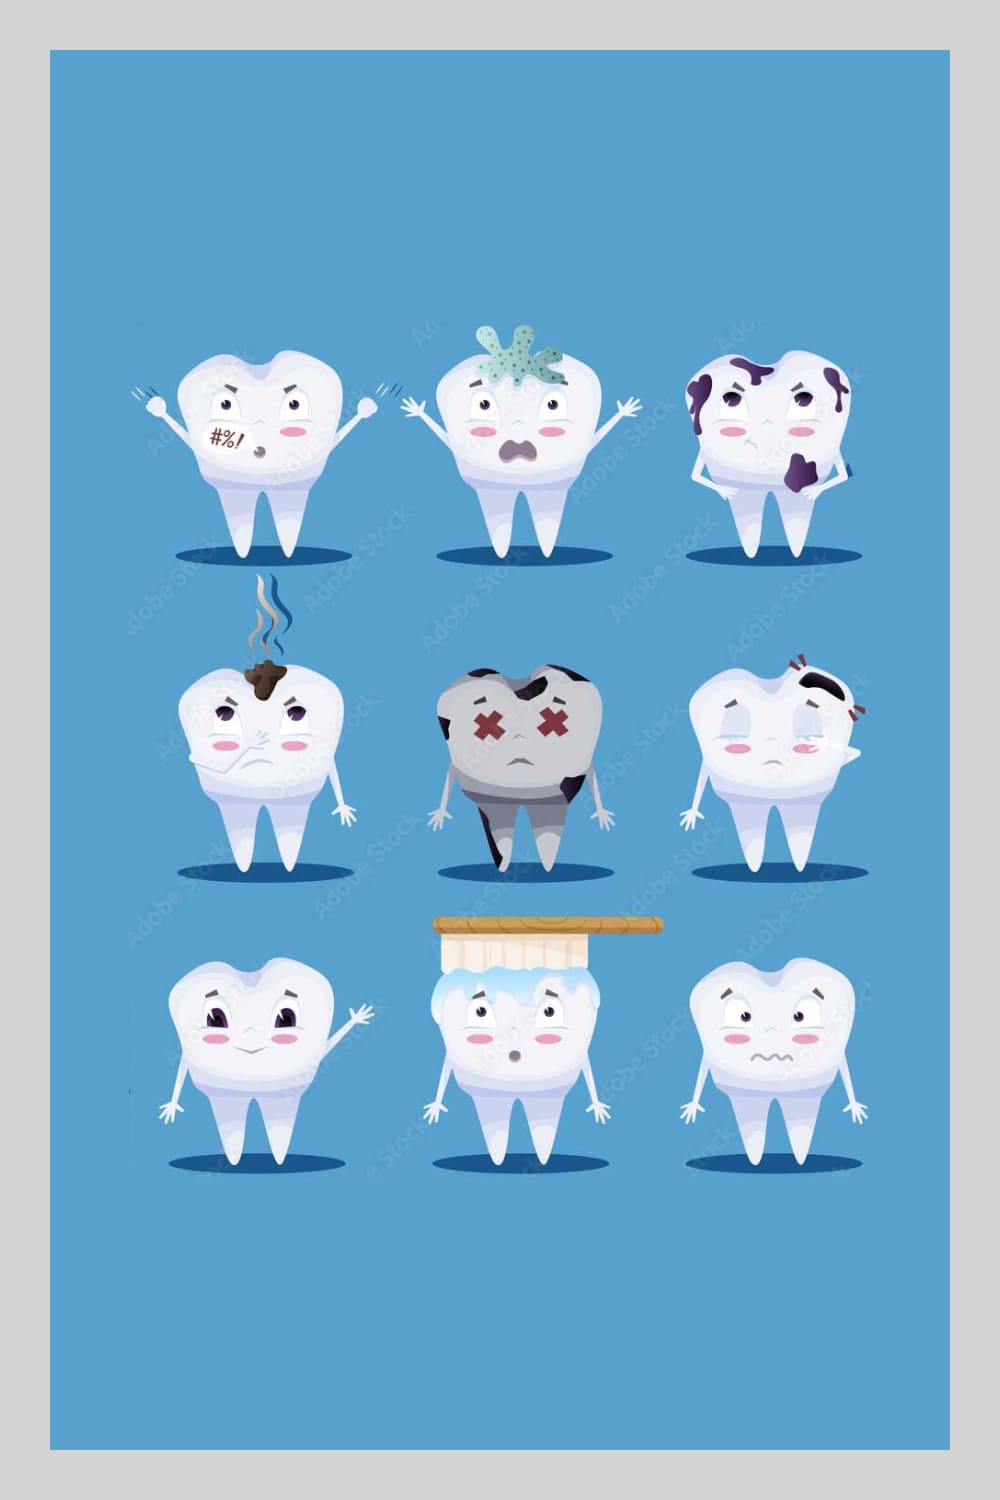 Cute tooth characters set in cartoon style. teeth with different emotions set for label design. vector illustration.